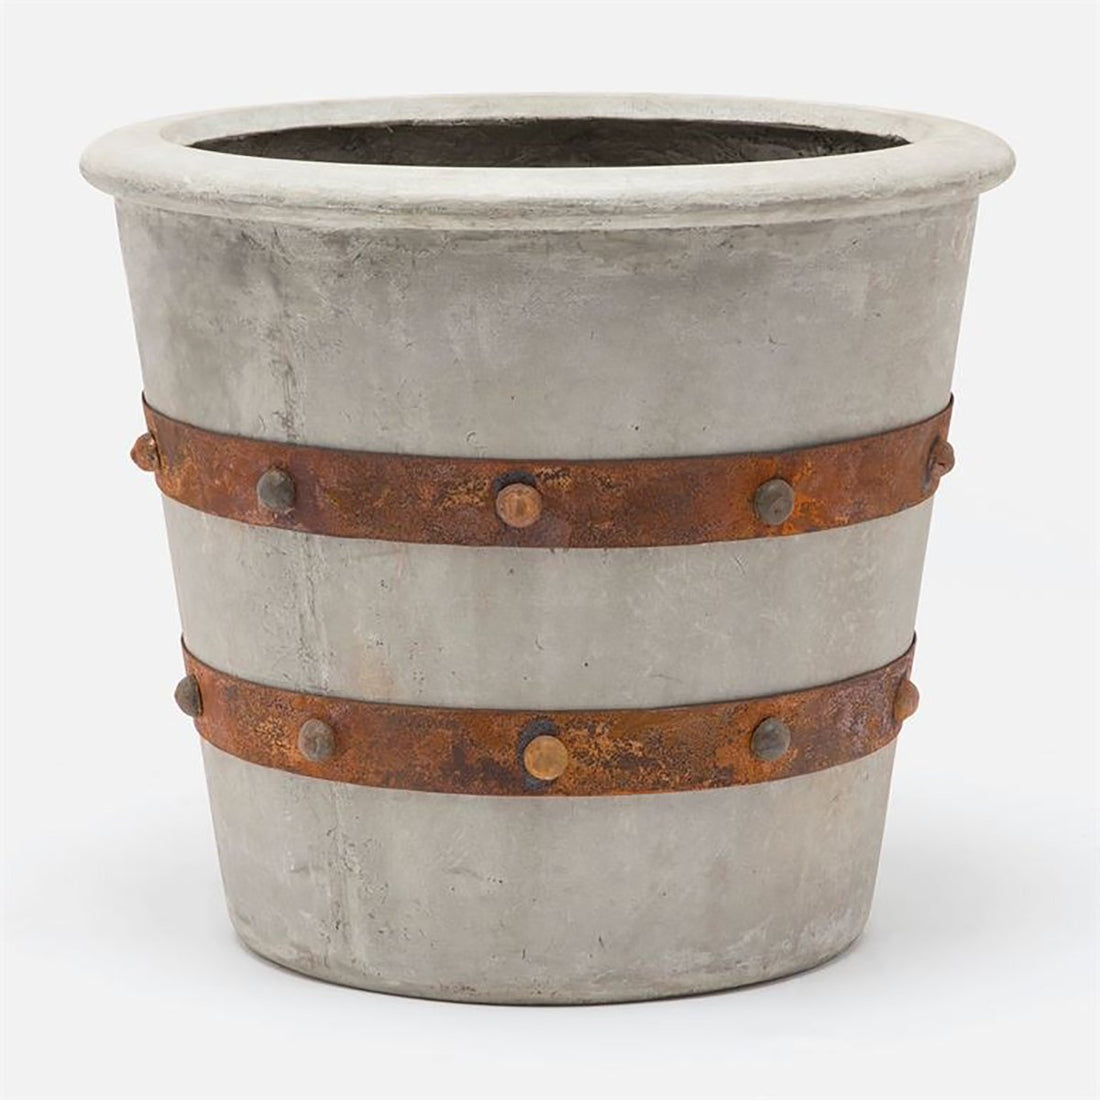 Made Goods Rorike Concrete Outdoor Planter with Metal Rings